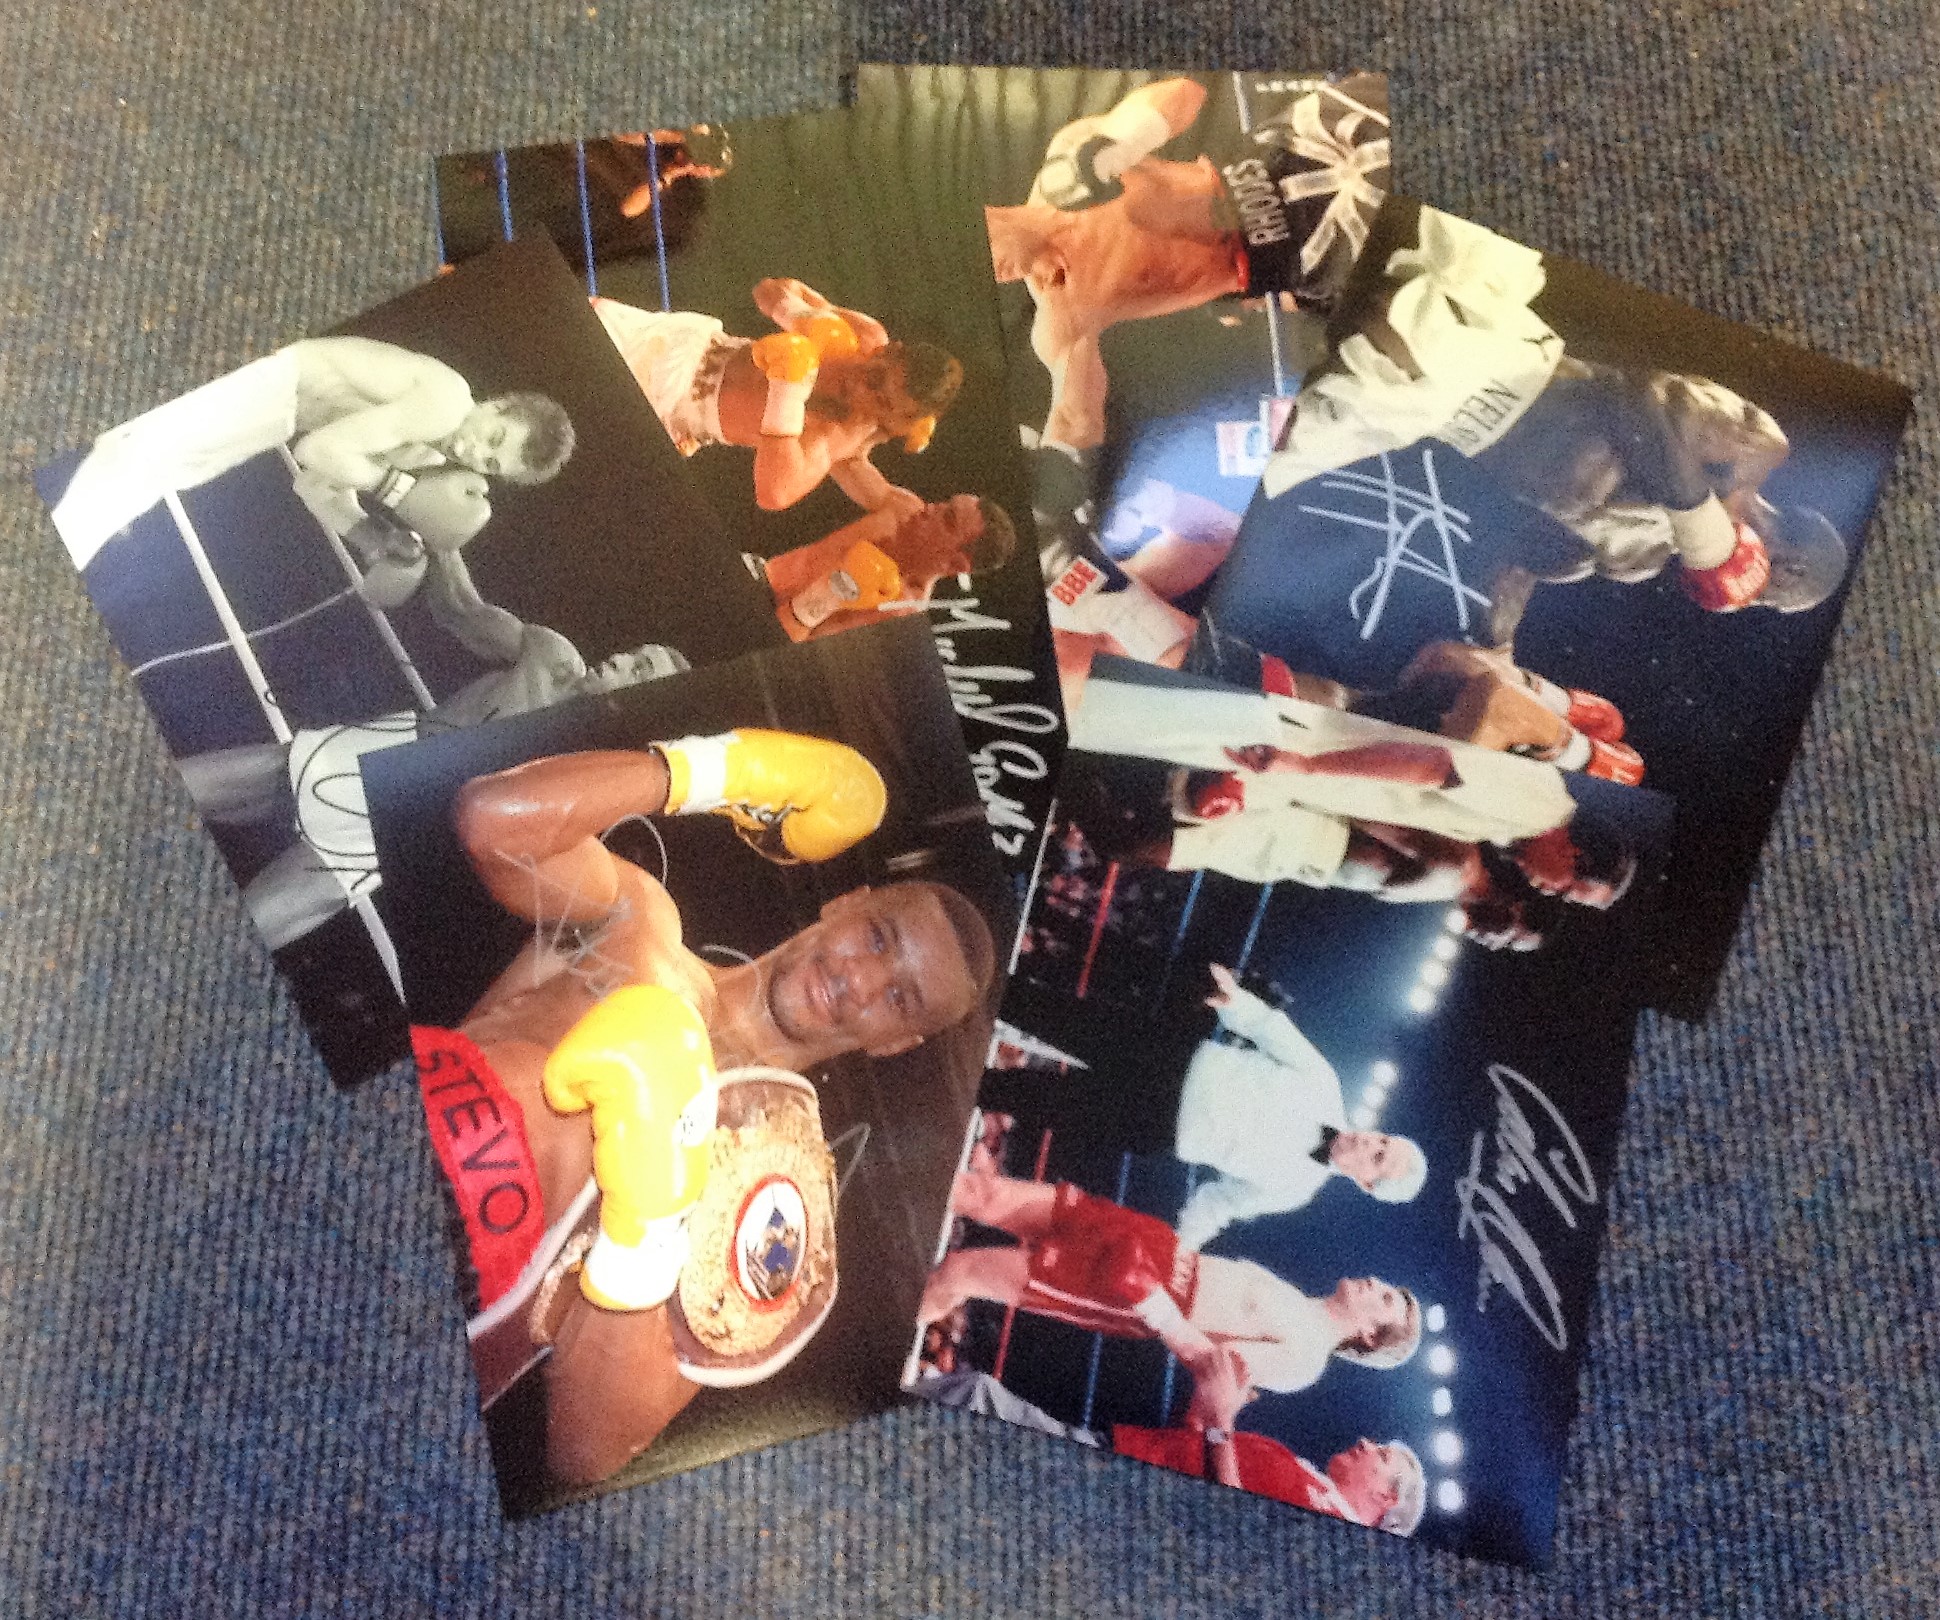 Boxing collection 6 fantastic signed 10x8 assorted photos from some well-known British fighters such